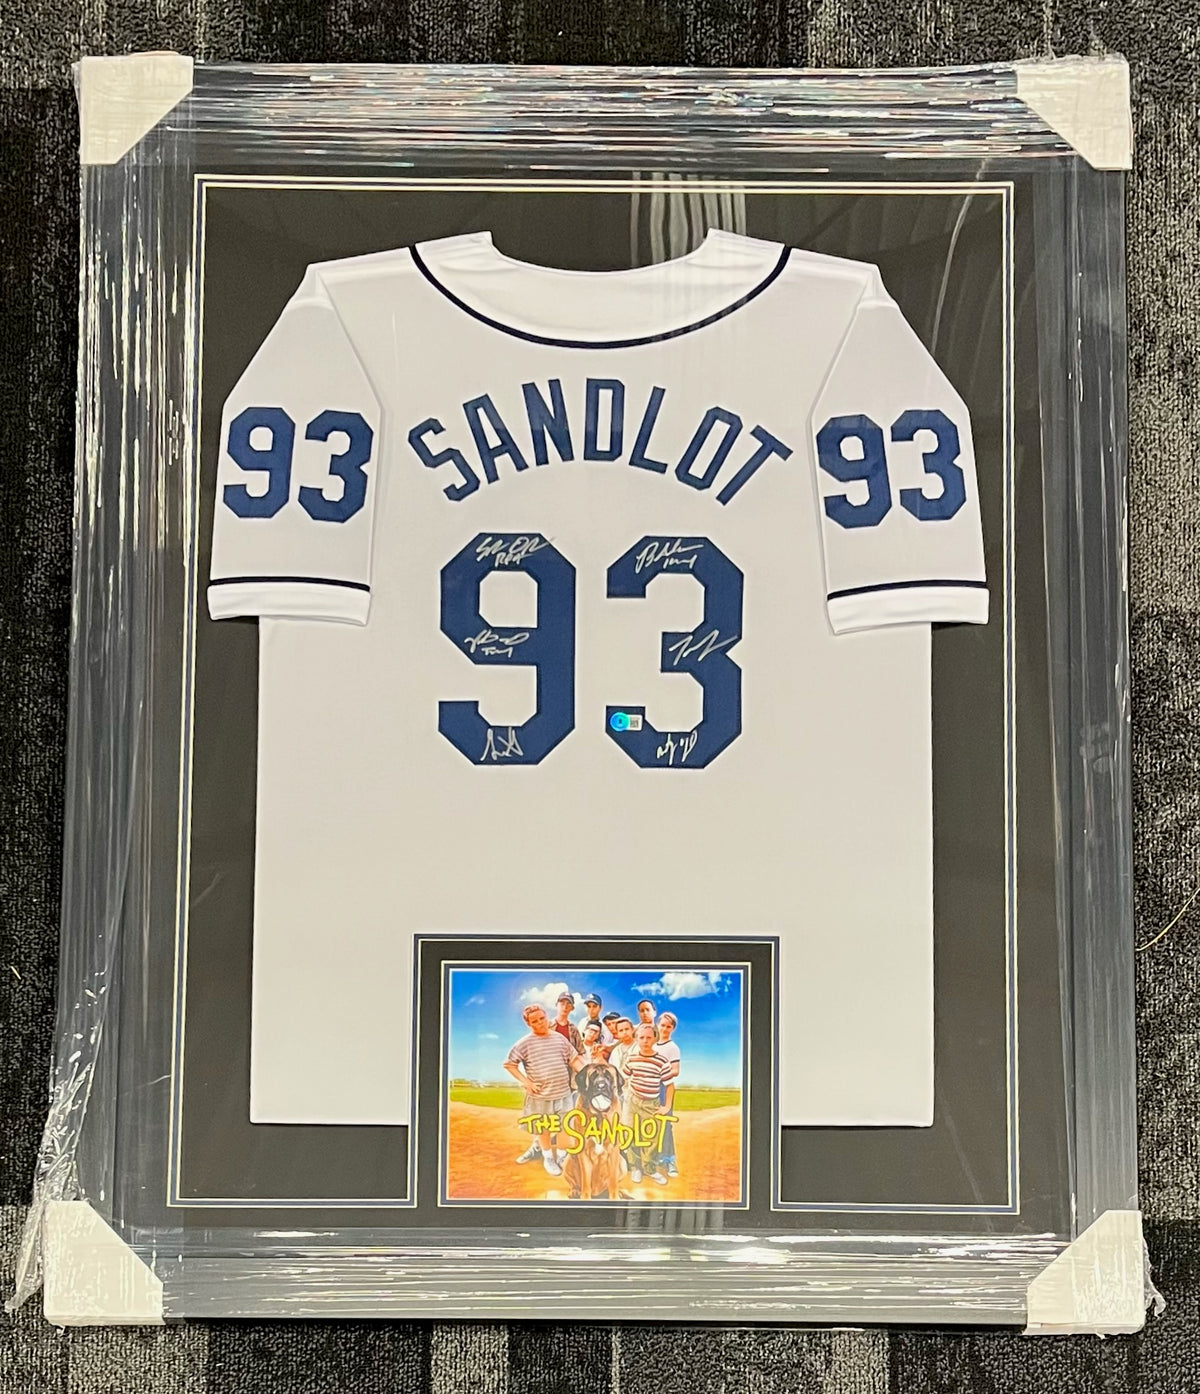 Marty York Signed Autographed 8X10 Photo The Sandlot 'Yeah